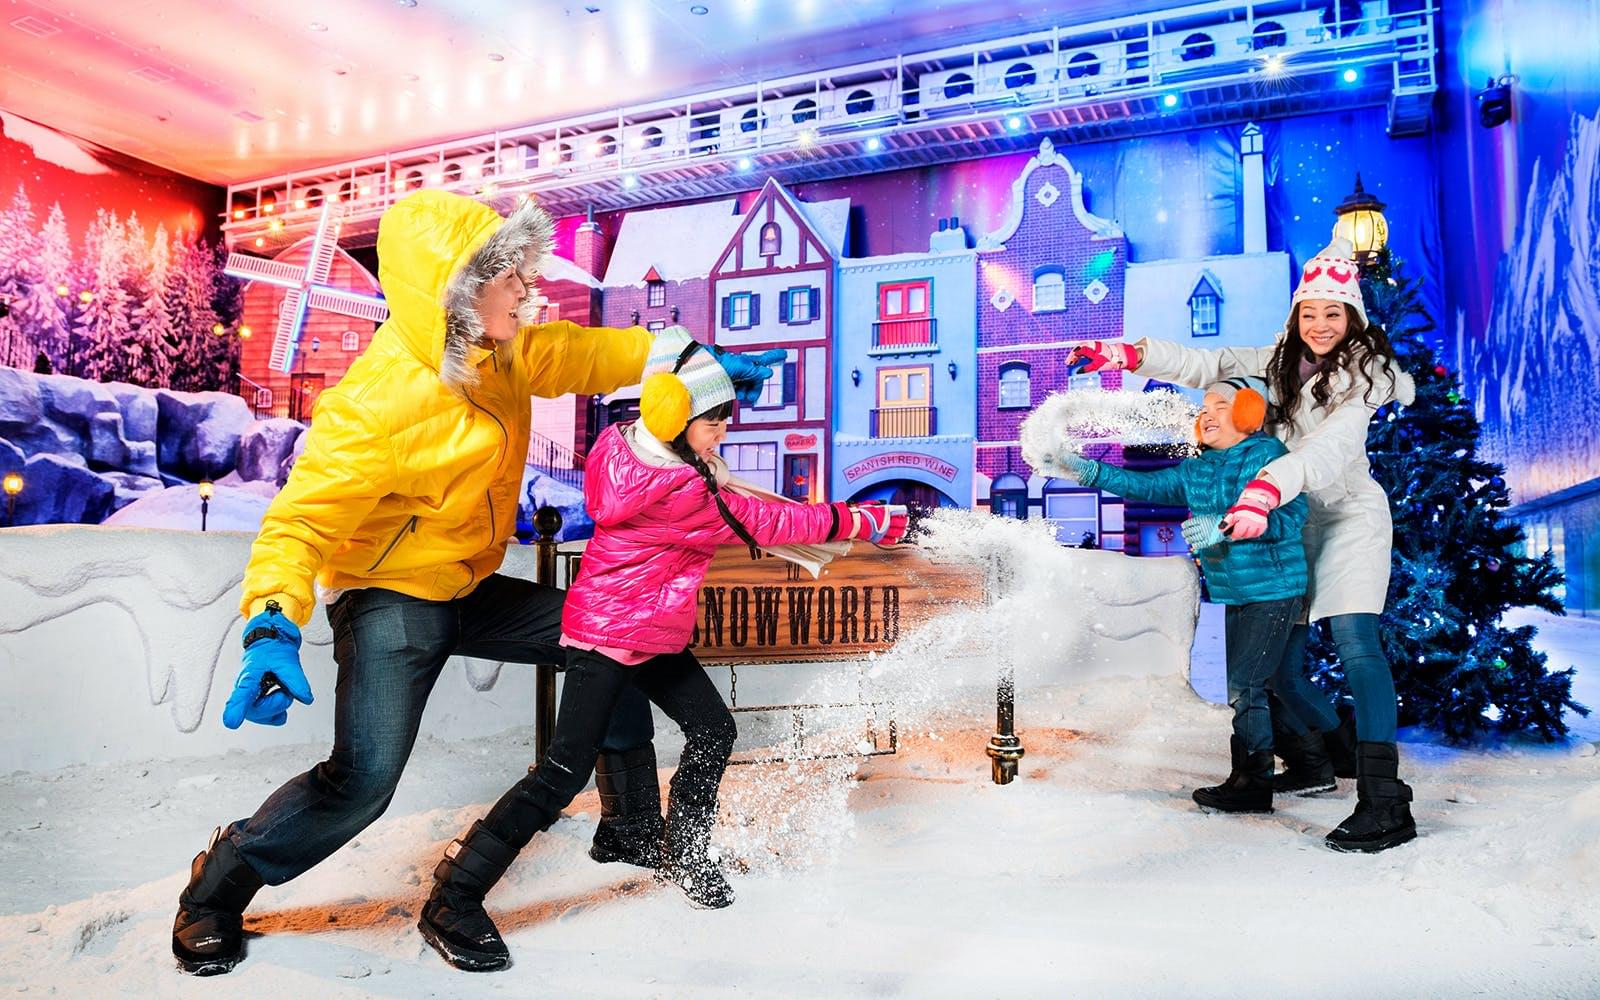 Don't miss out on various fun activities here at Snow City Singapore